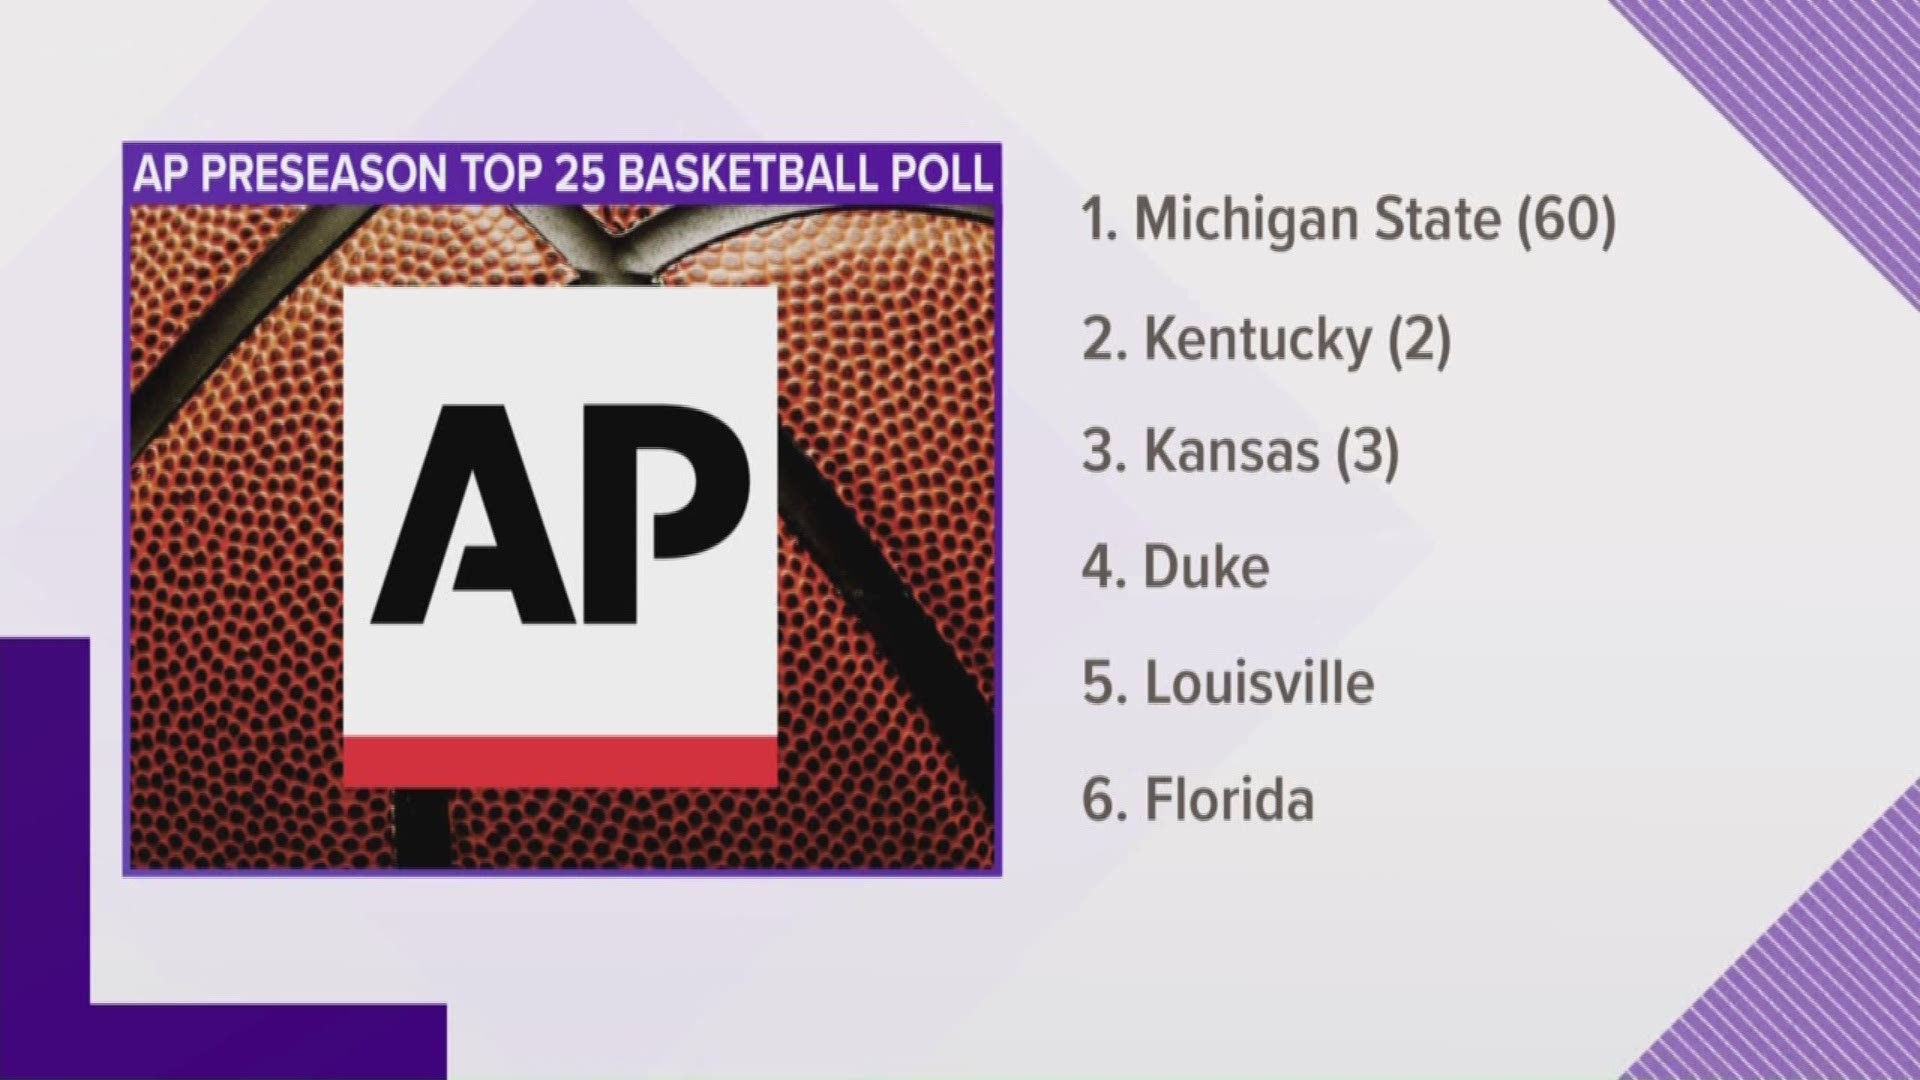 The AP preseason poll was released with both the Cards and the Cats in the top five.